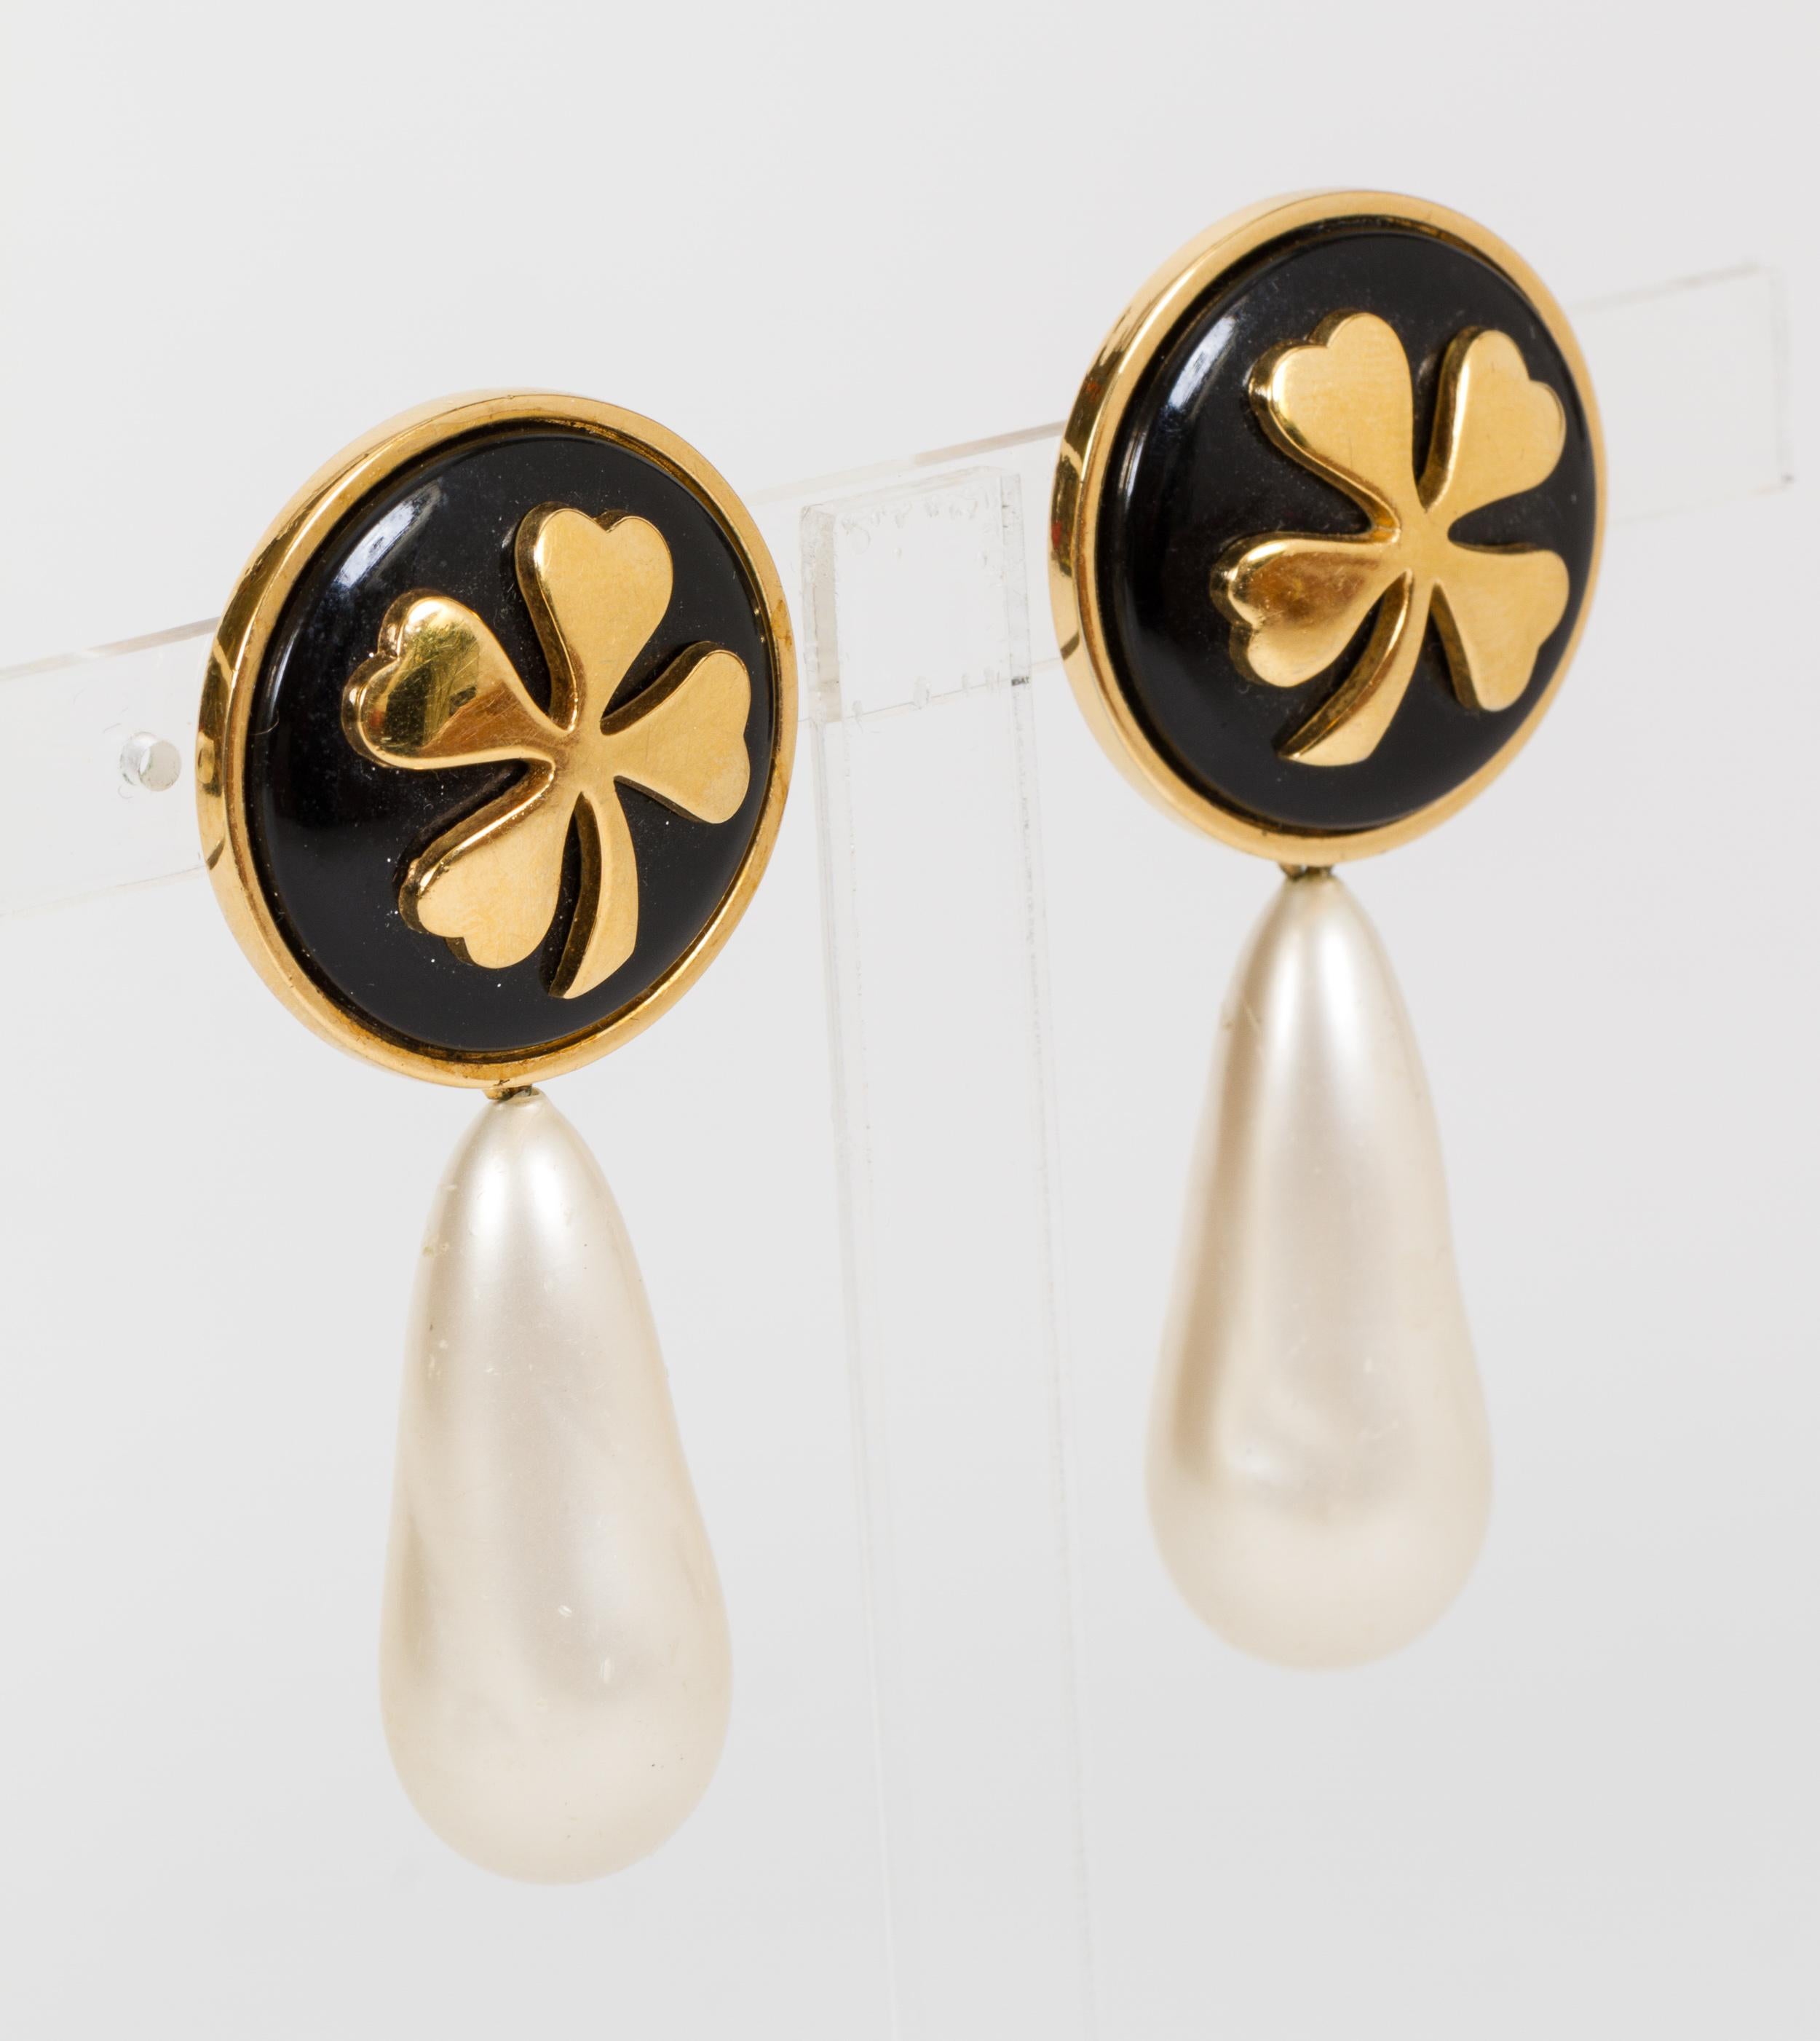 Chanel black and gold clover clip on earrings with gripoix pearl drop. 1970s collection. Comes with a velvet pouch.